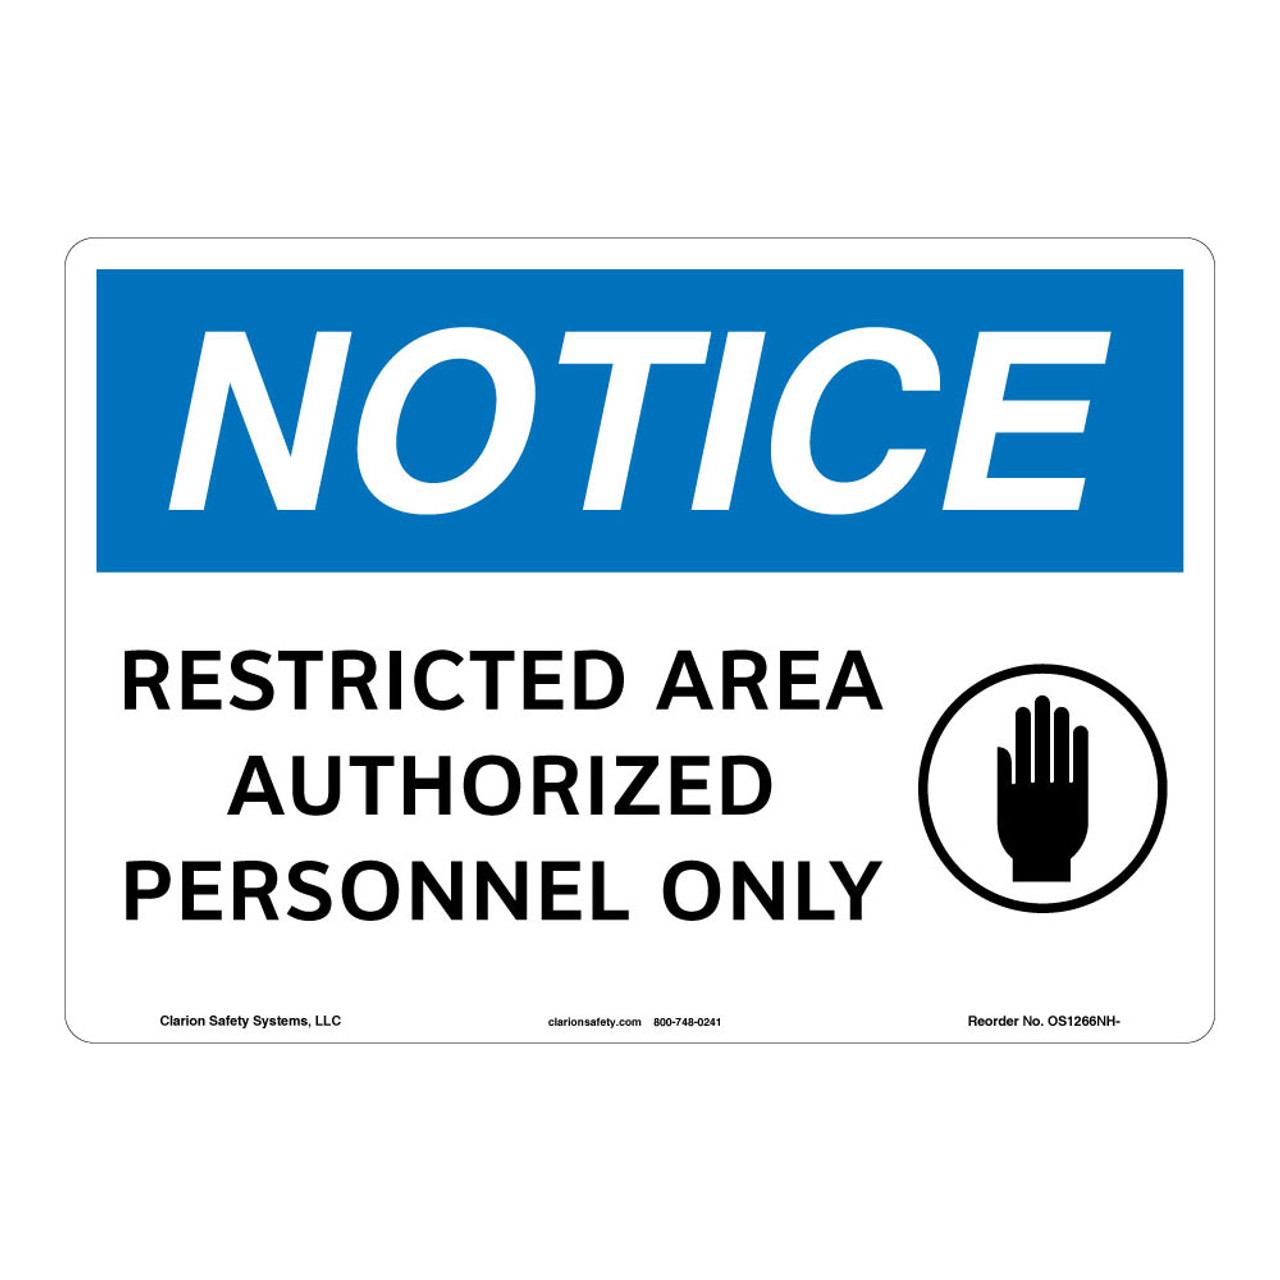 OSHA Sign - NOTICE Deionized Water Only - Industrial Notices